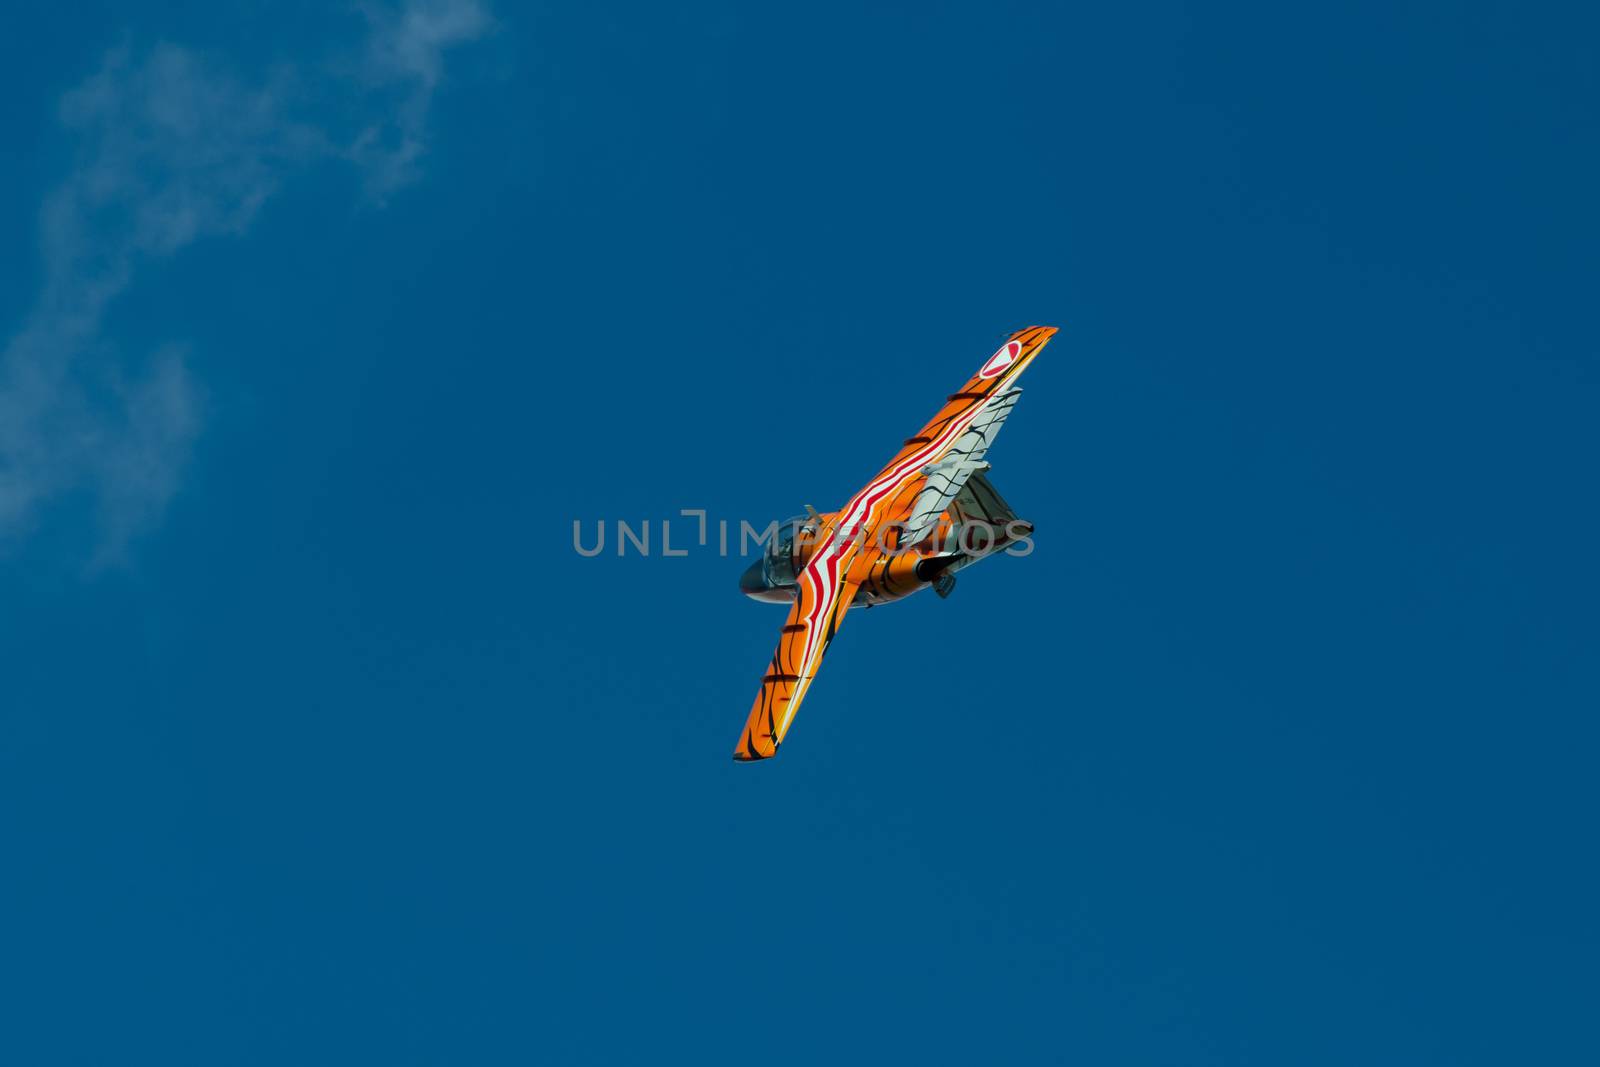 SAAB 105 OE display during Air Show 2013 event on August 25, 2013 in Radom, Poland